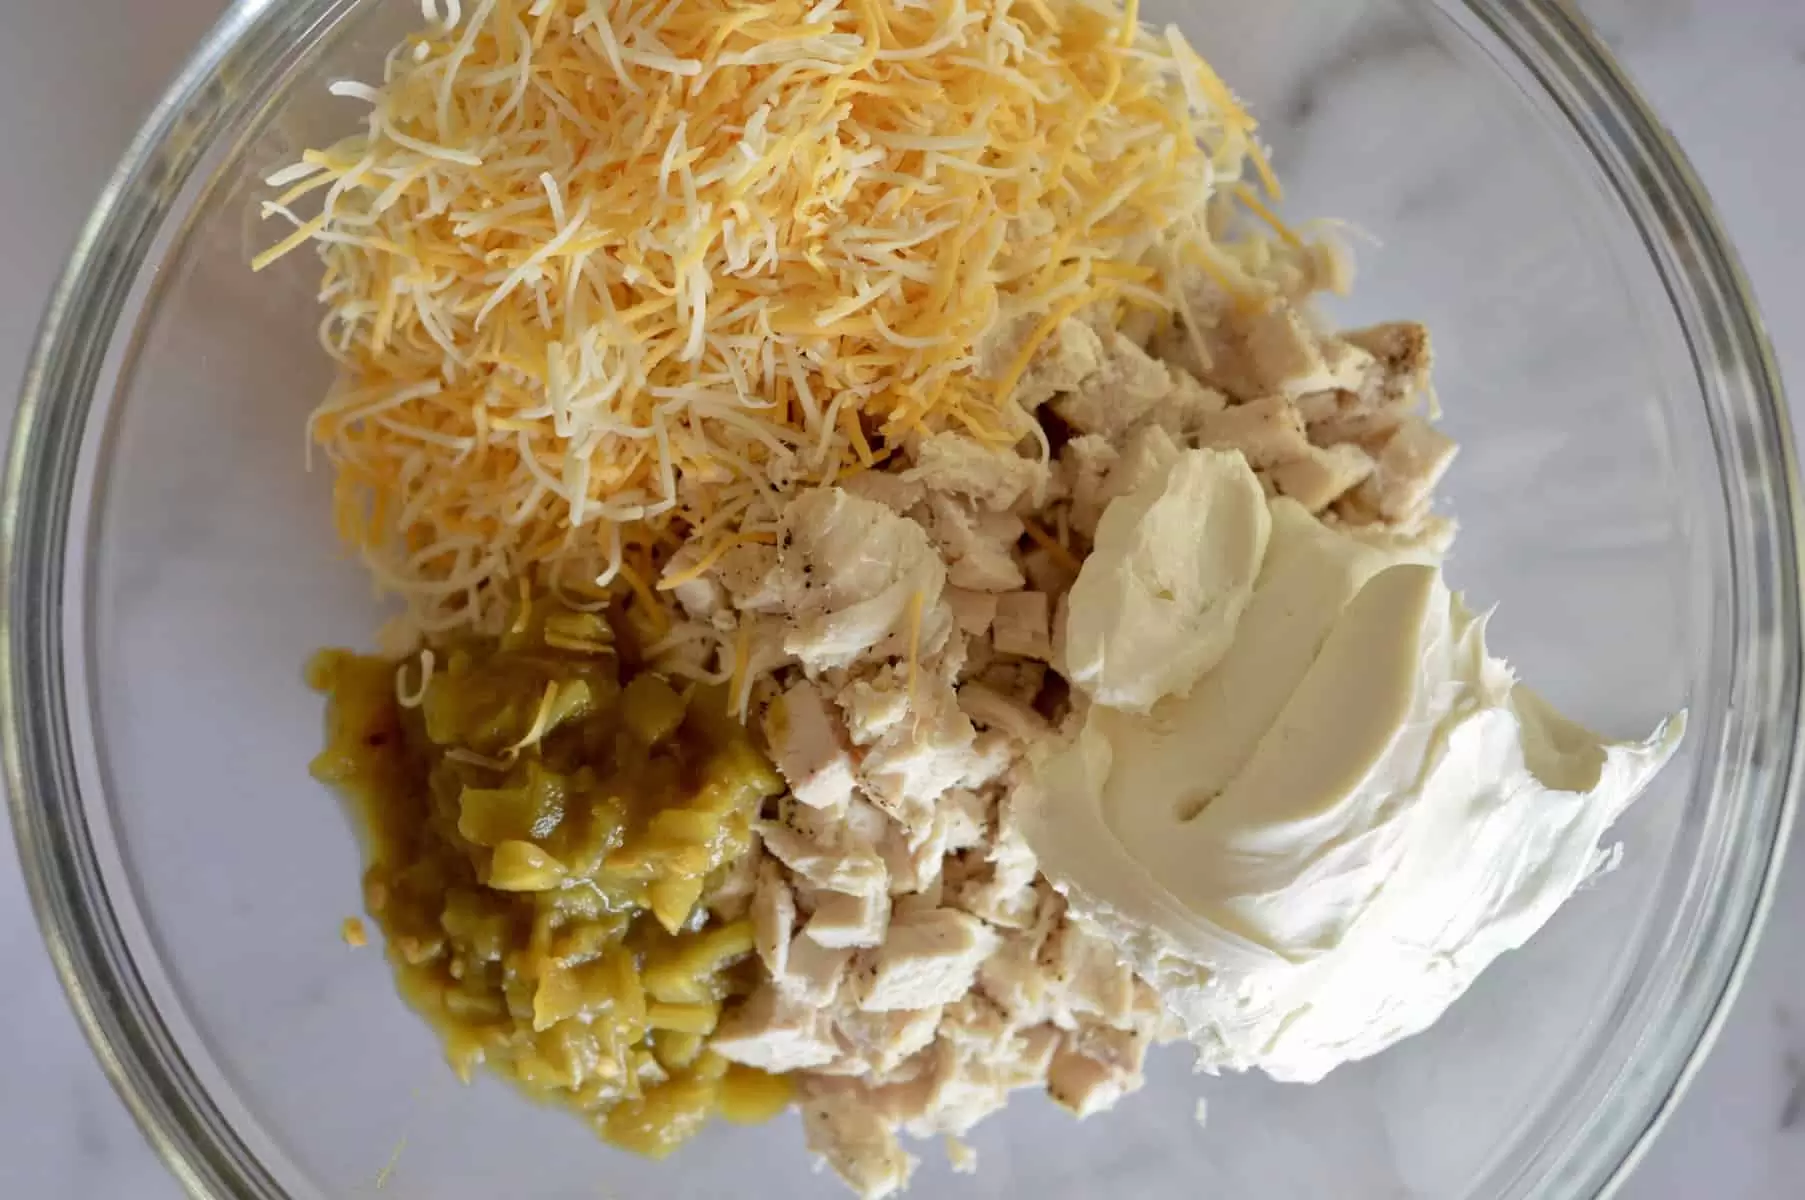 chicken in a bowl along with cream cheese, green chilis, and shredded cheddar cheese.